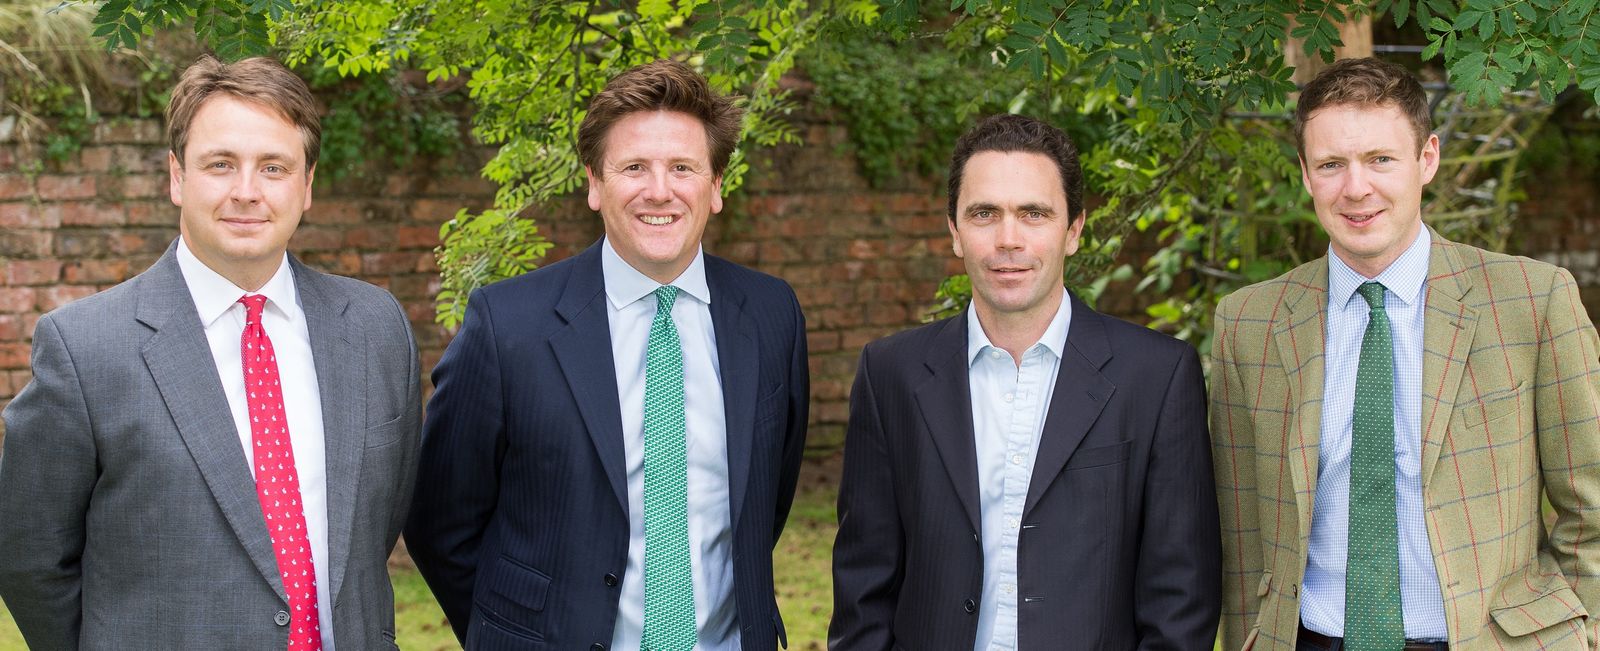 Property search agency finds new partners as business expands